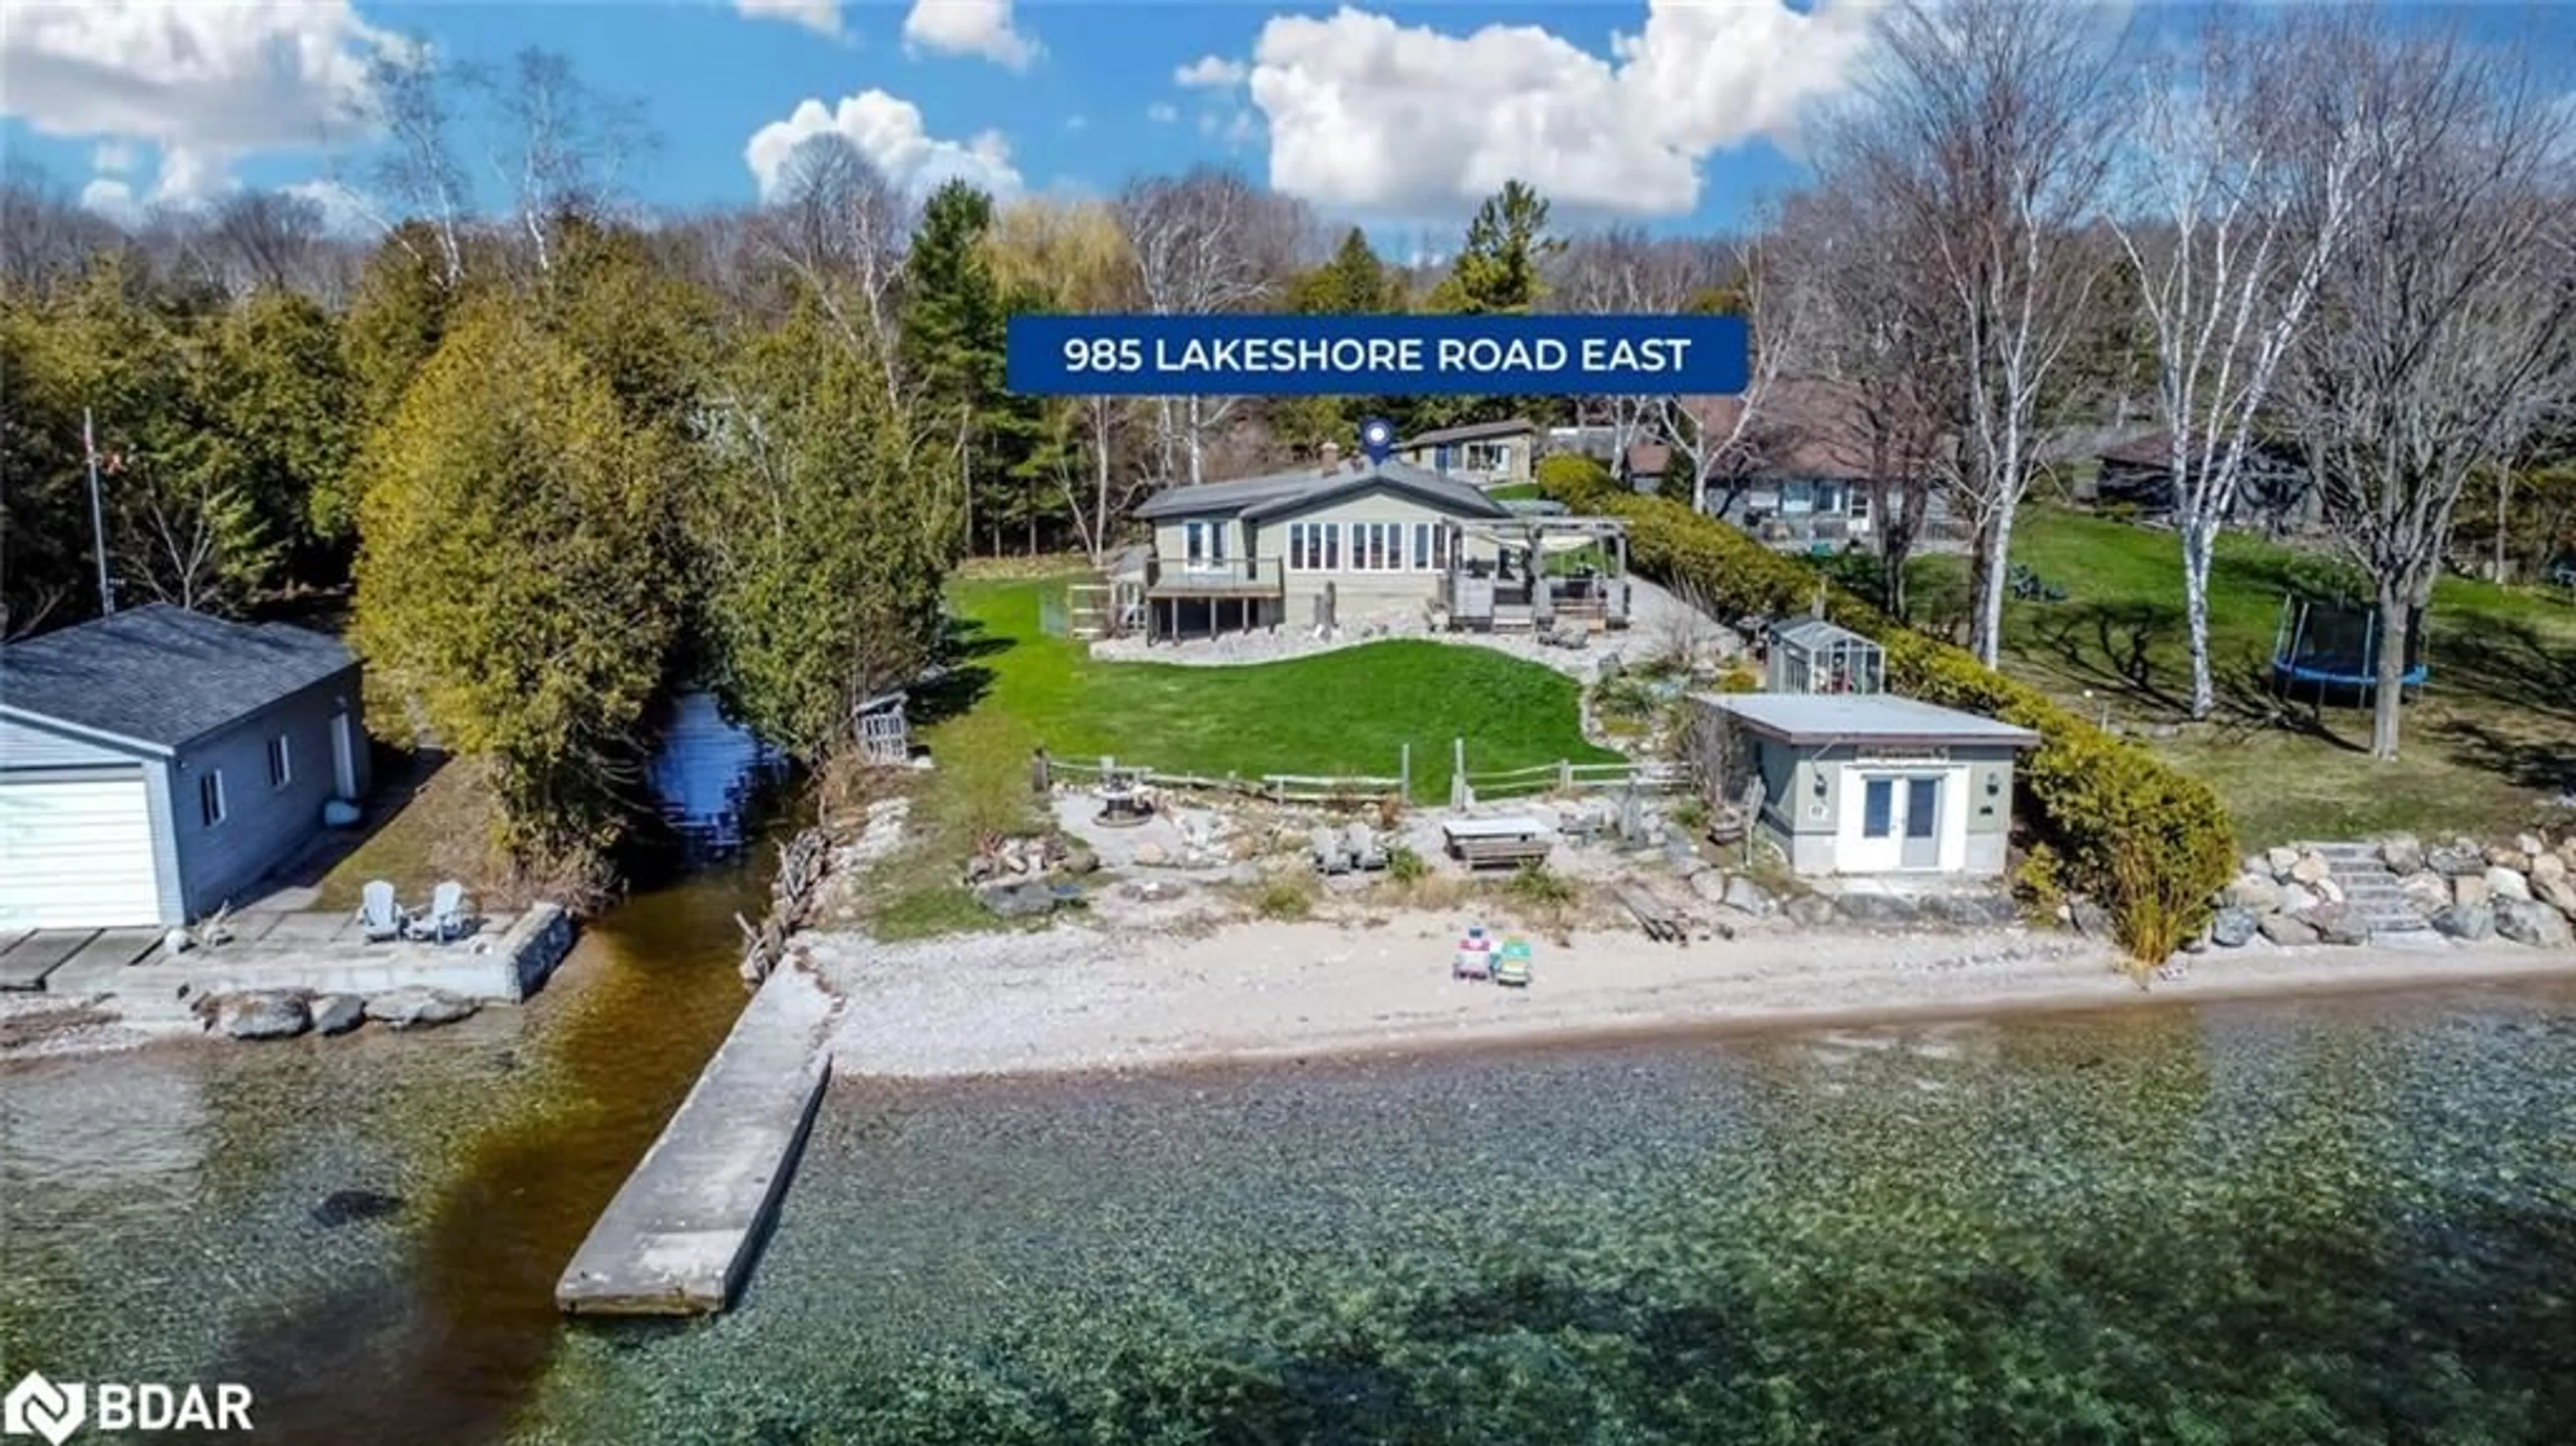 Lakeview for 985 Lakeshore Rd E Rd, Oro-Medonte Ontario L0L 1T0